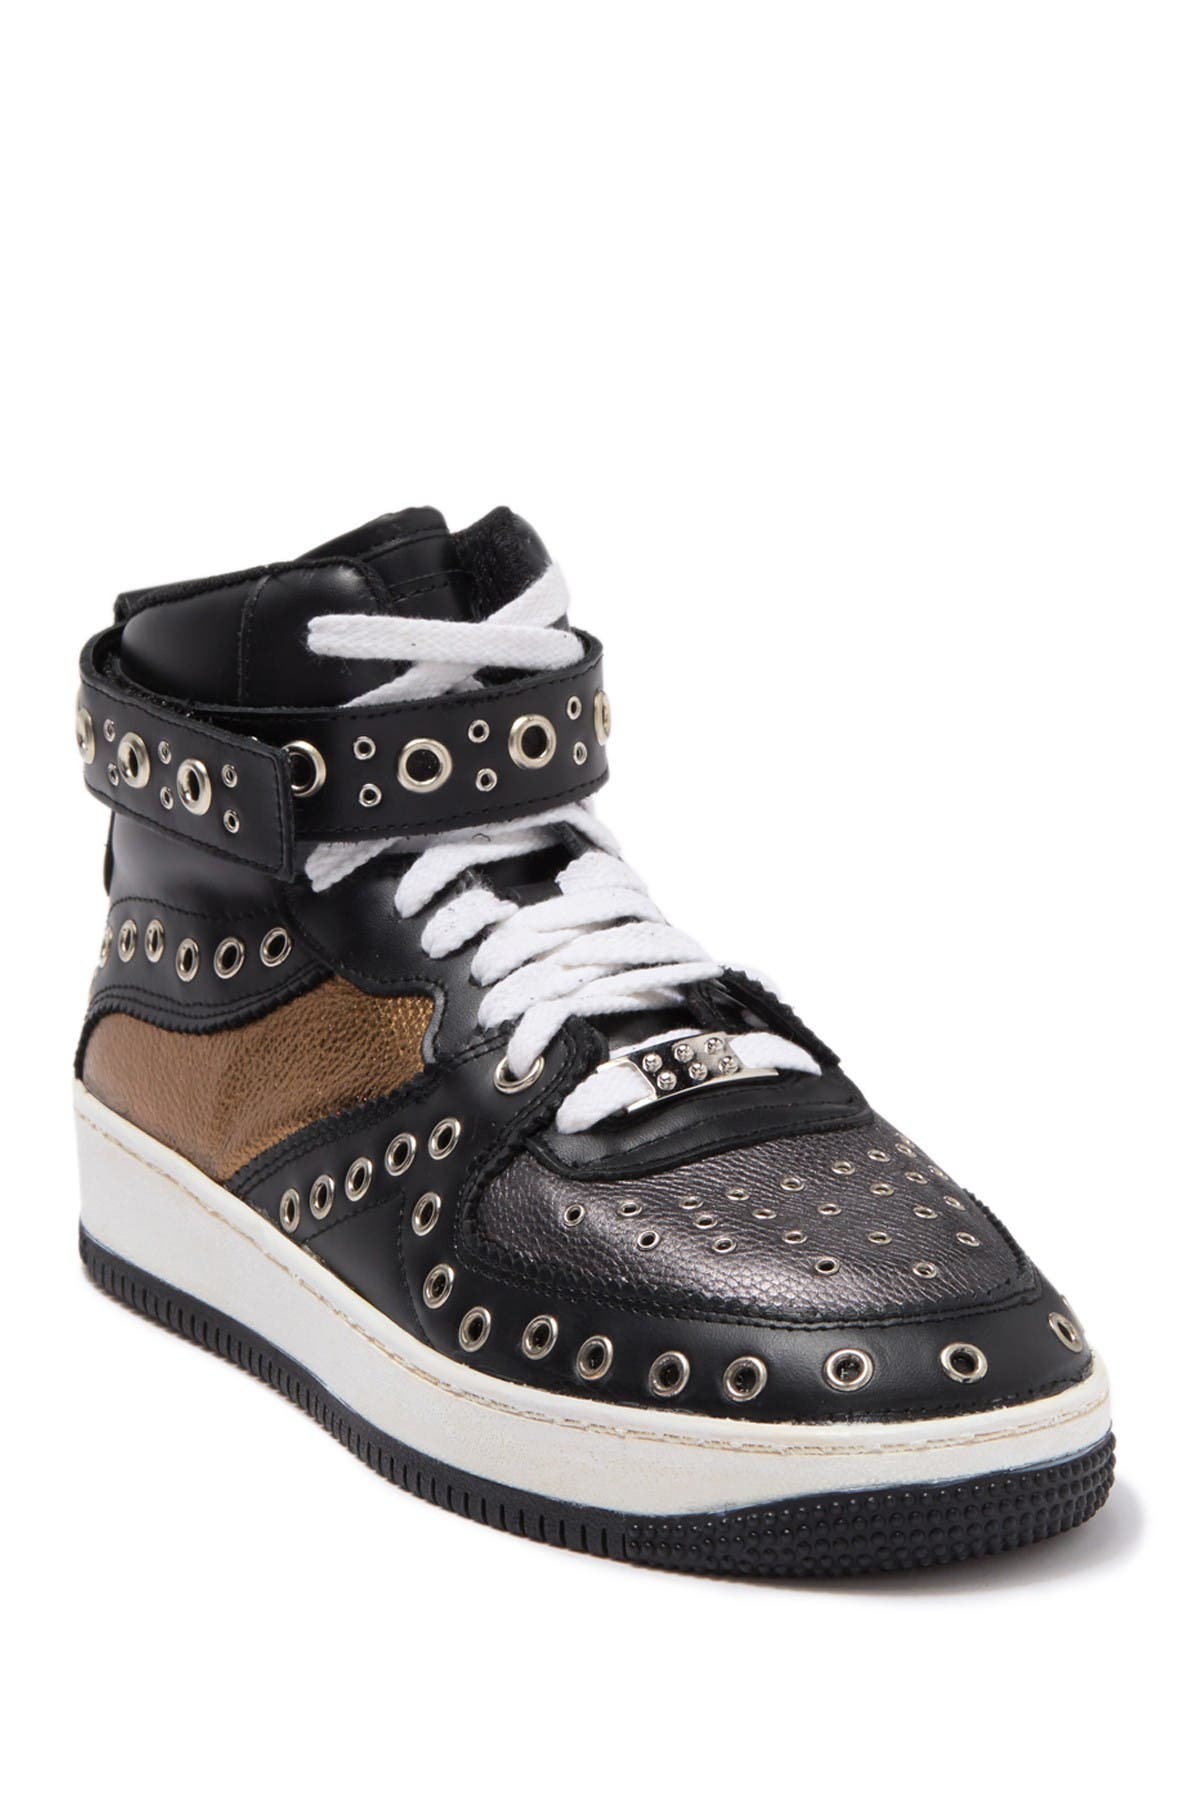 Red Valentino Grommet High Top Sneaker In Oxford4